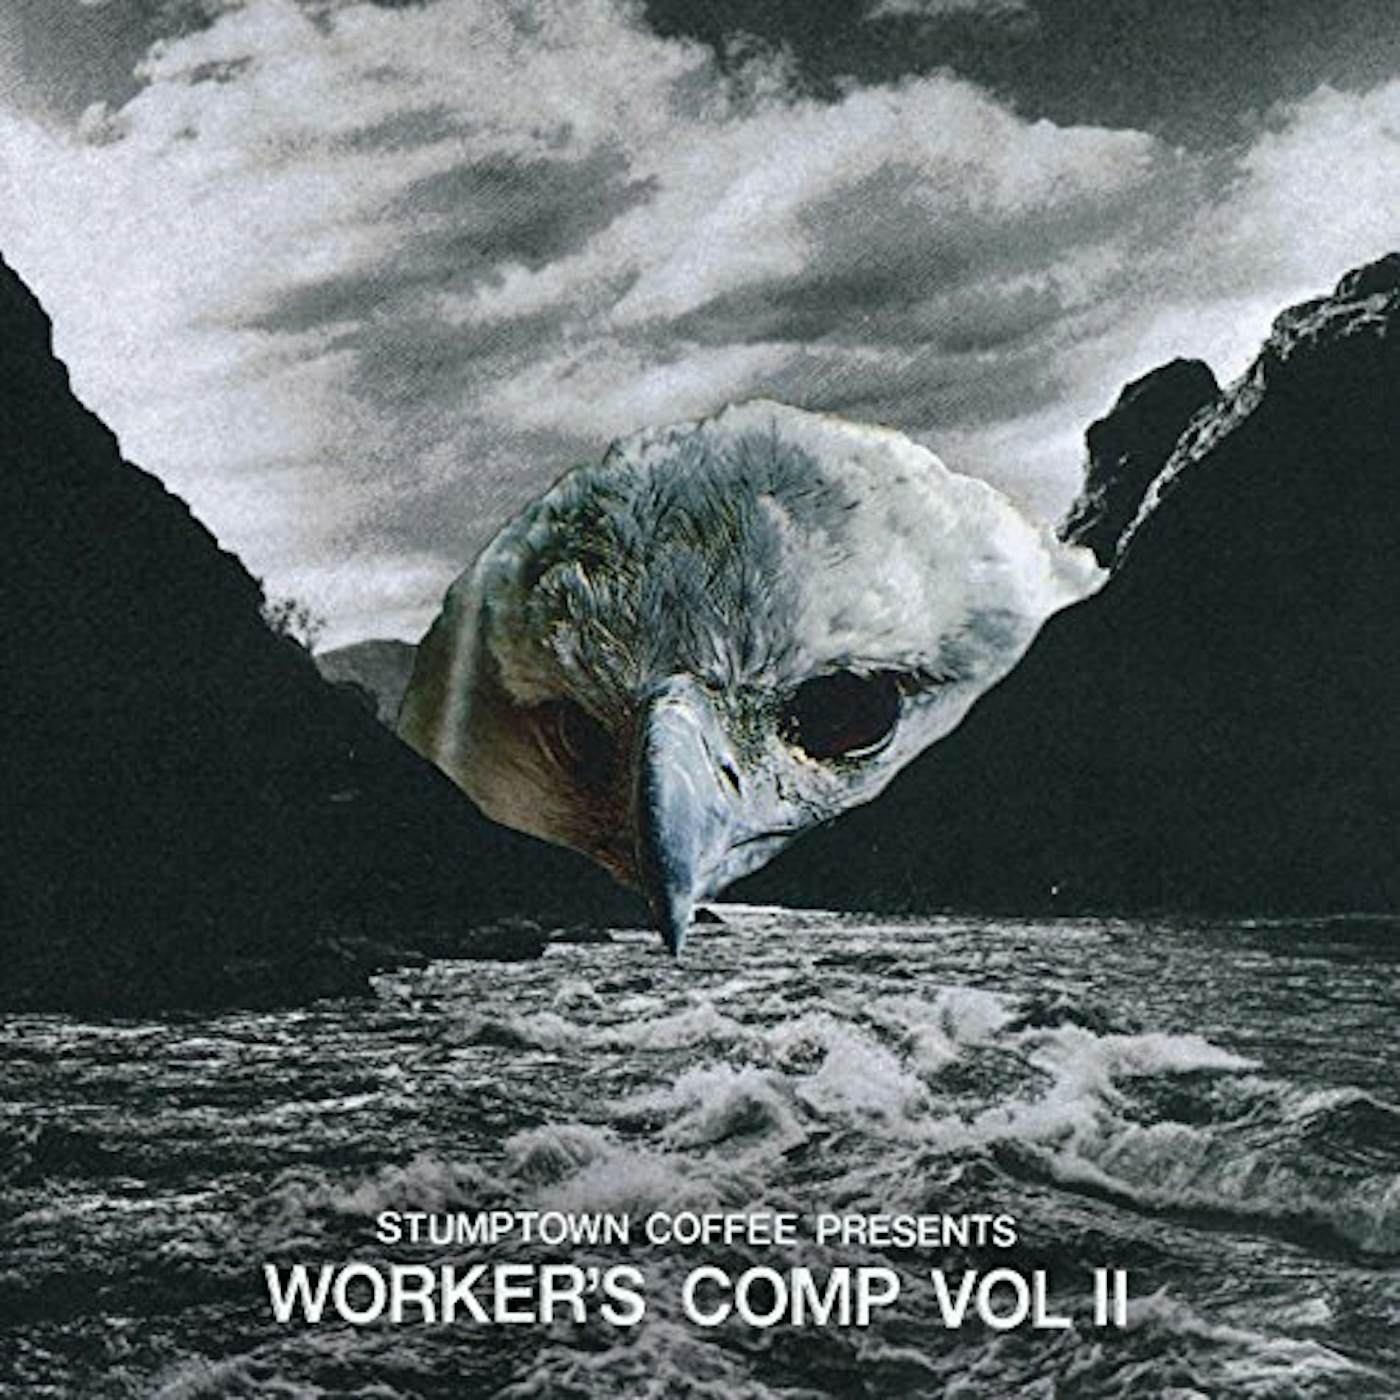 Dommengang WORKERS COMP 2 Vinyl Record